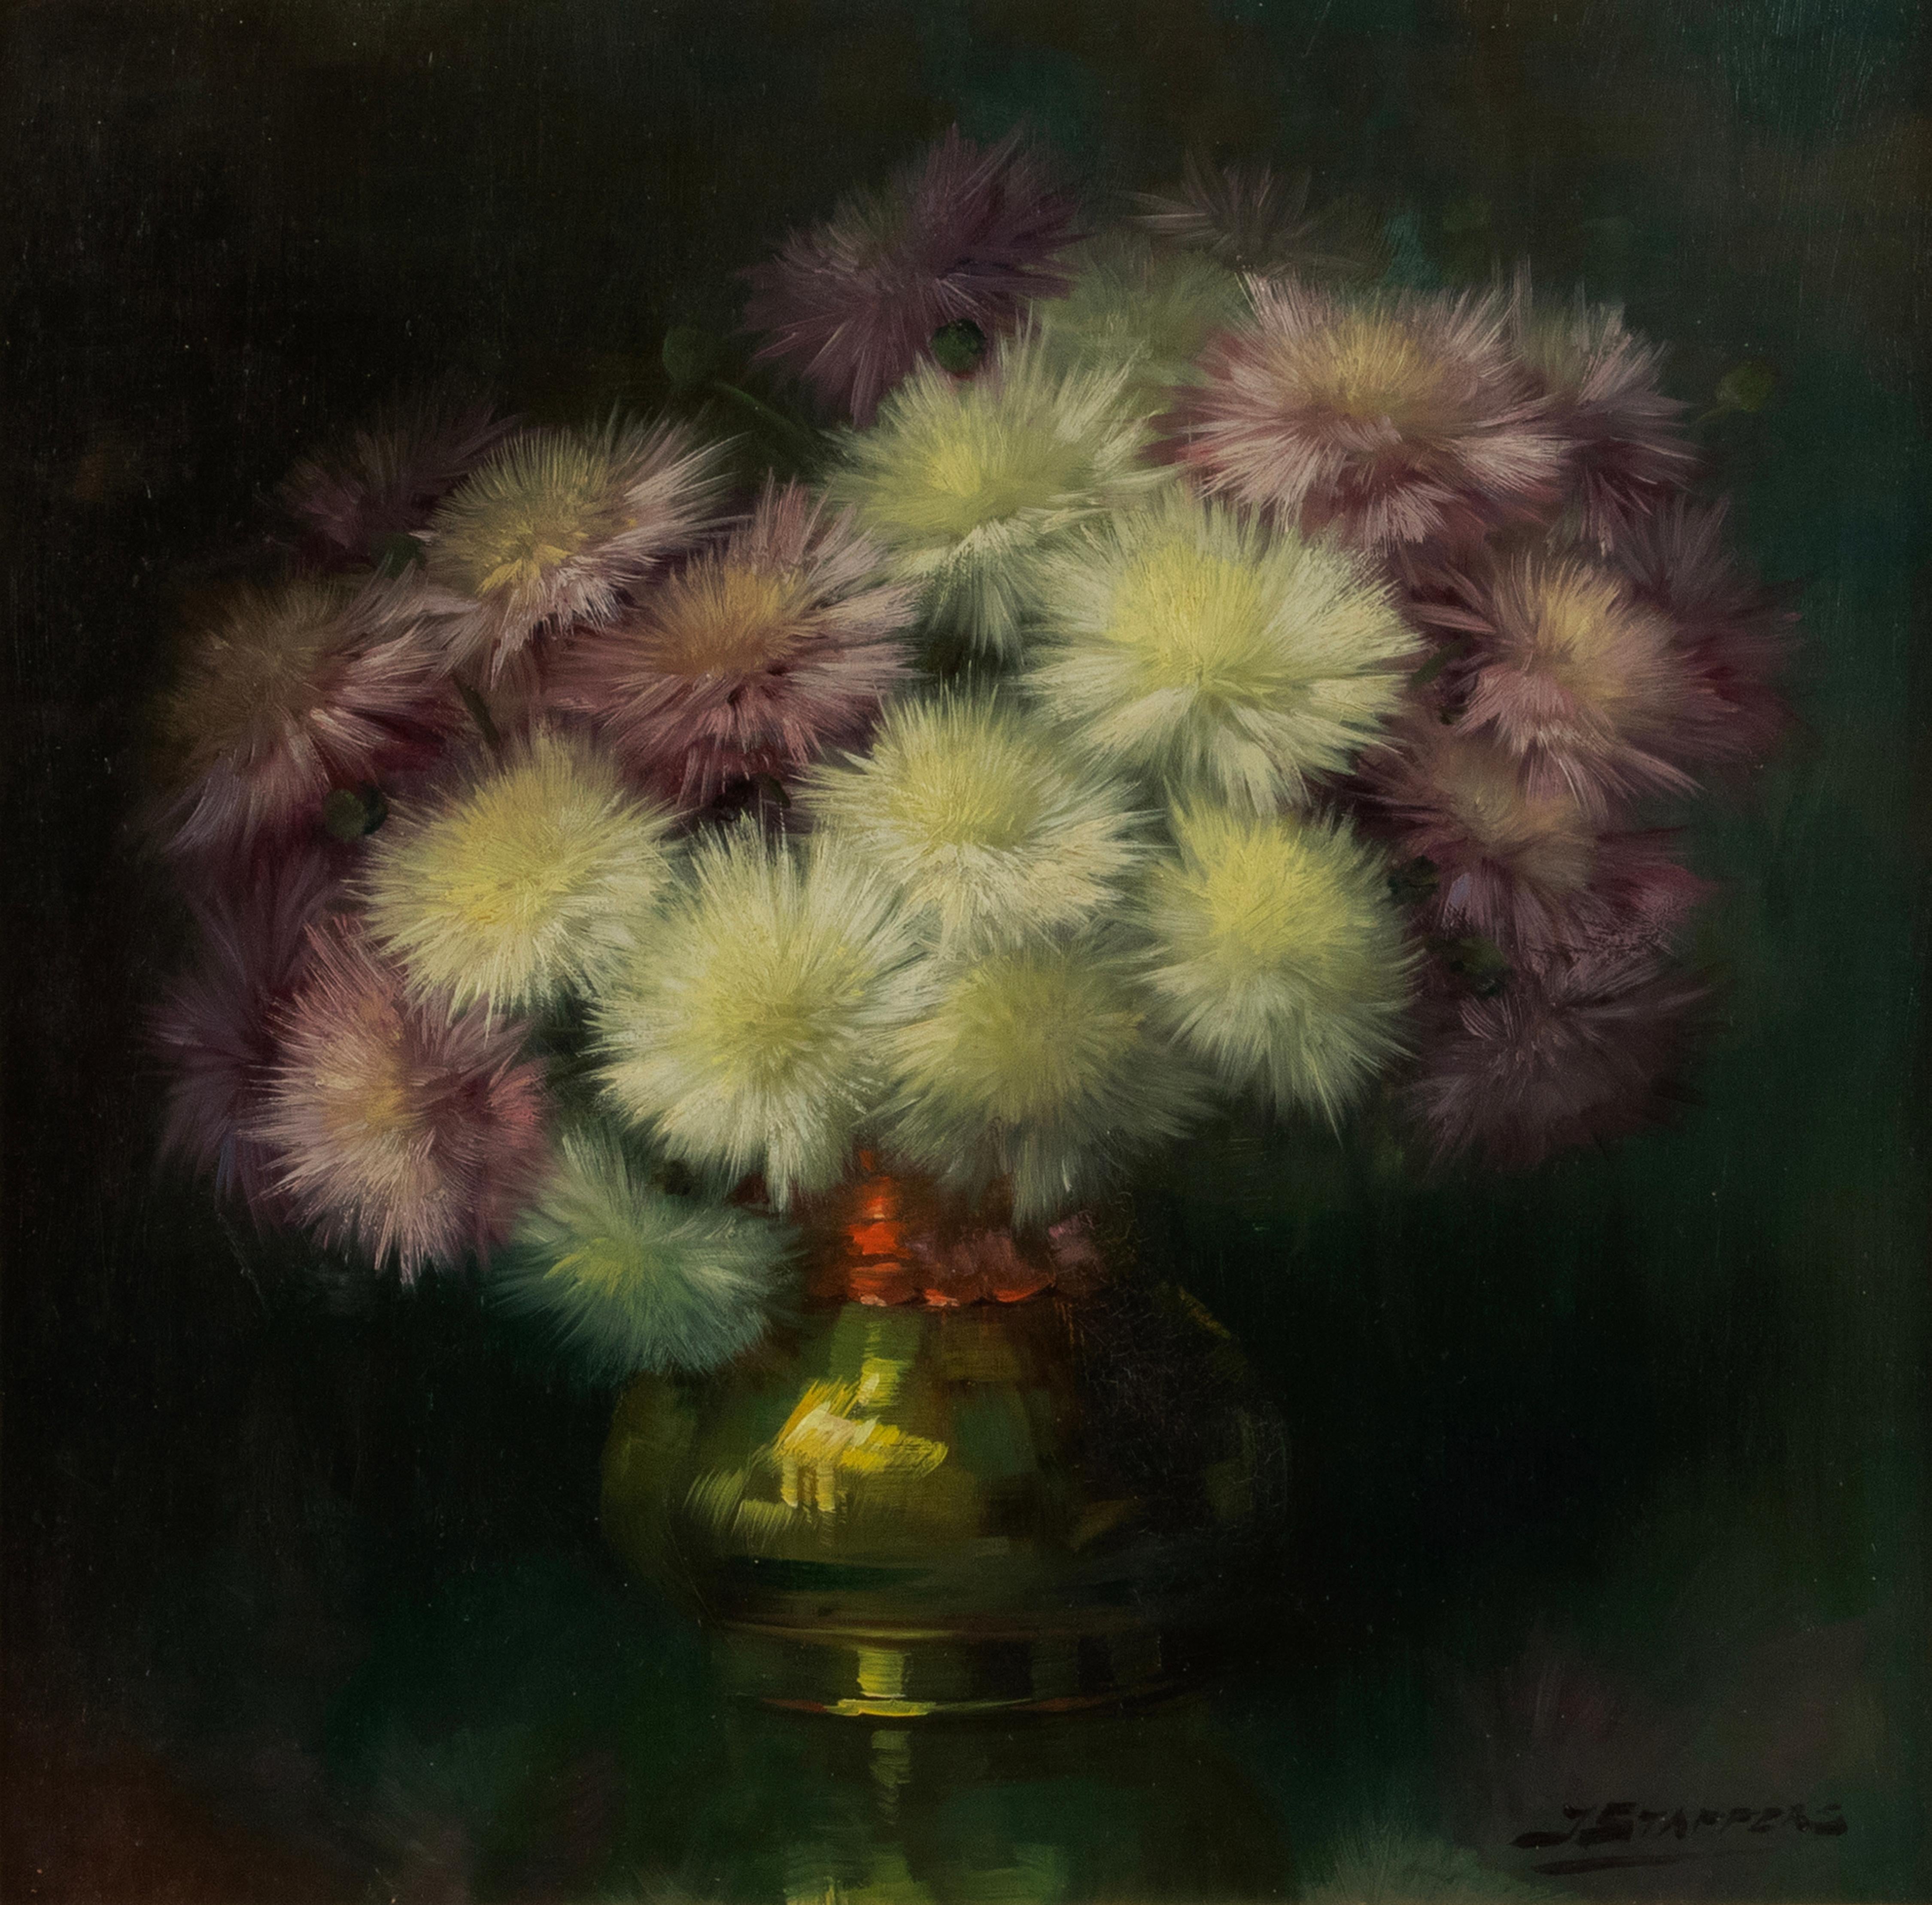 A beautiful flower still life painting. Most likely the Thalictrum Nimbus plant, in a copper vase. Signed bottom right Julien Stappers. Painted with oil paint on canvas. The painting is behind a glass, so the colors remain beautiful. In an original